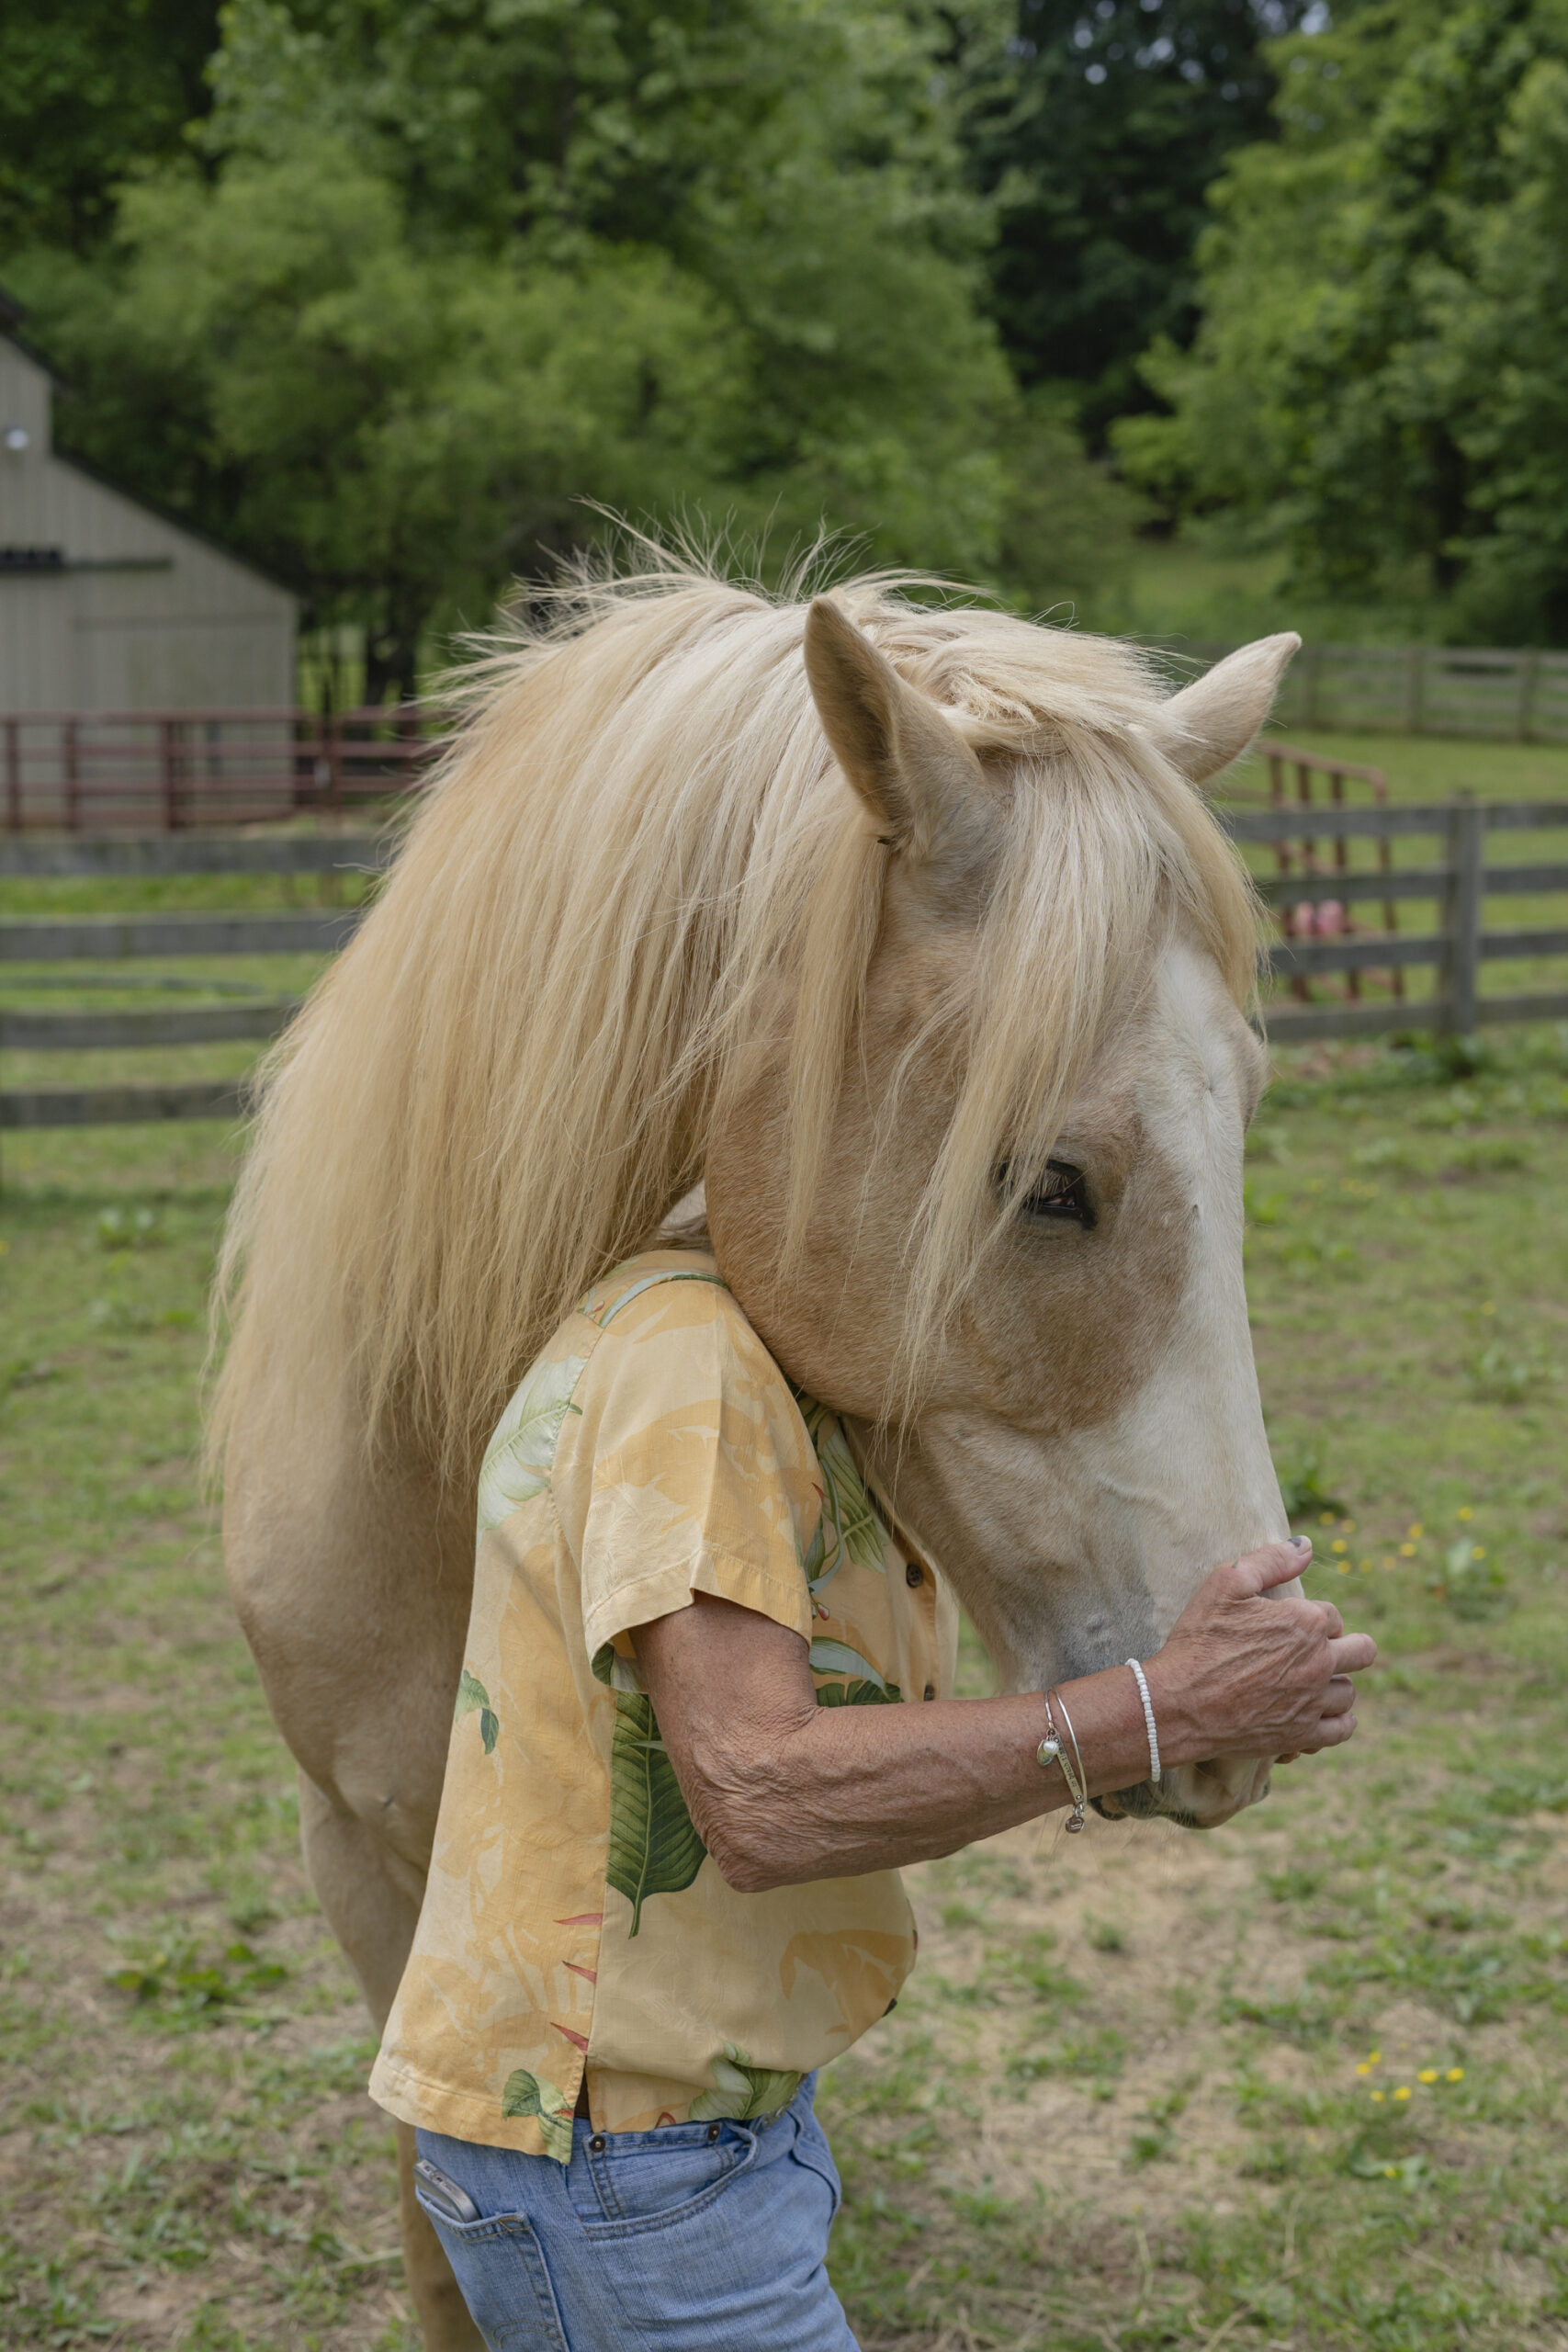 Sherrie Foy caring for her horses at her home in Moneta, Virginia, May 16, 2022. Foy had her colon removed at the University of Virginia's Health System in 2016. She later developed a dangerous infection from the surgery and her medical bills exceeded her insurance limit of $1 million. When she and her husband couldn't pay her bills, the University of Virginia sued her for more than $700,000, forcing her and her husband to file for bankruptcy.